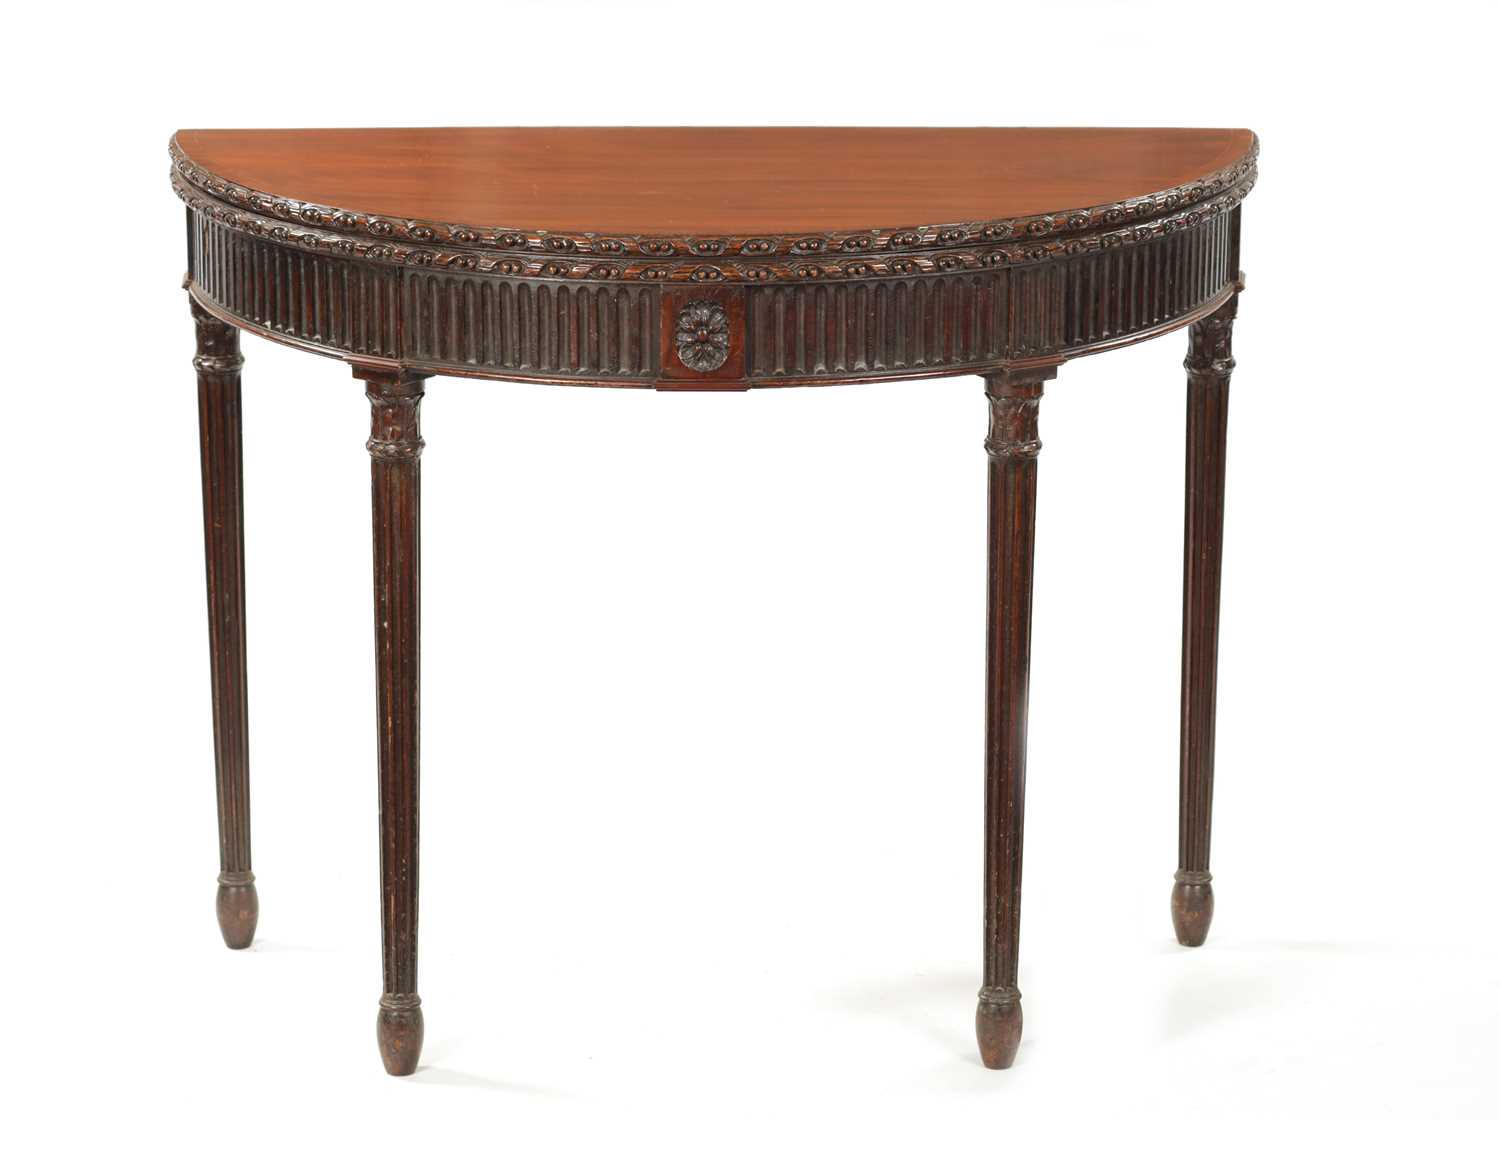 Lot 349 - A GEORGE III MAHOGANY DEMI LUNE CARD TABLE IN THE MANNER OF ROBERT ADAM